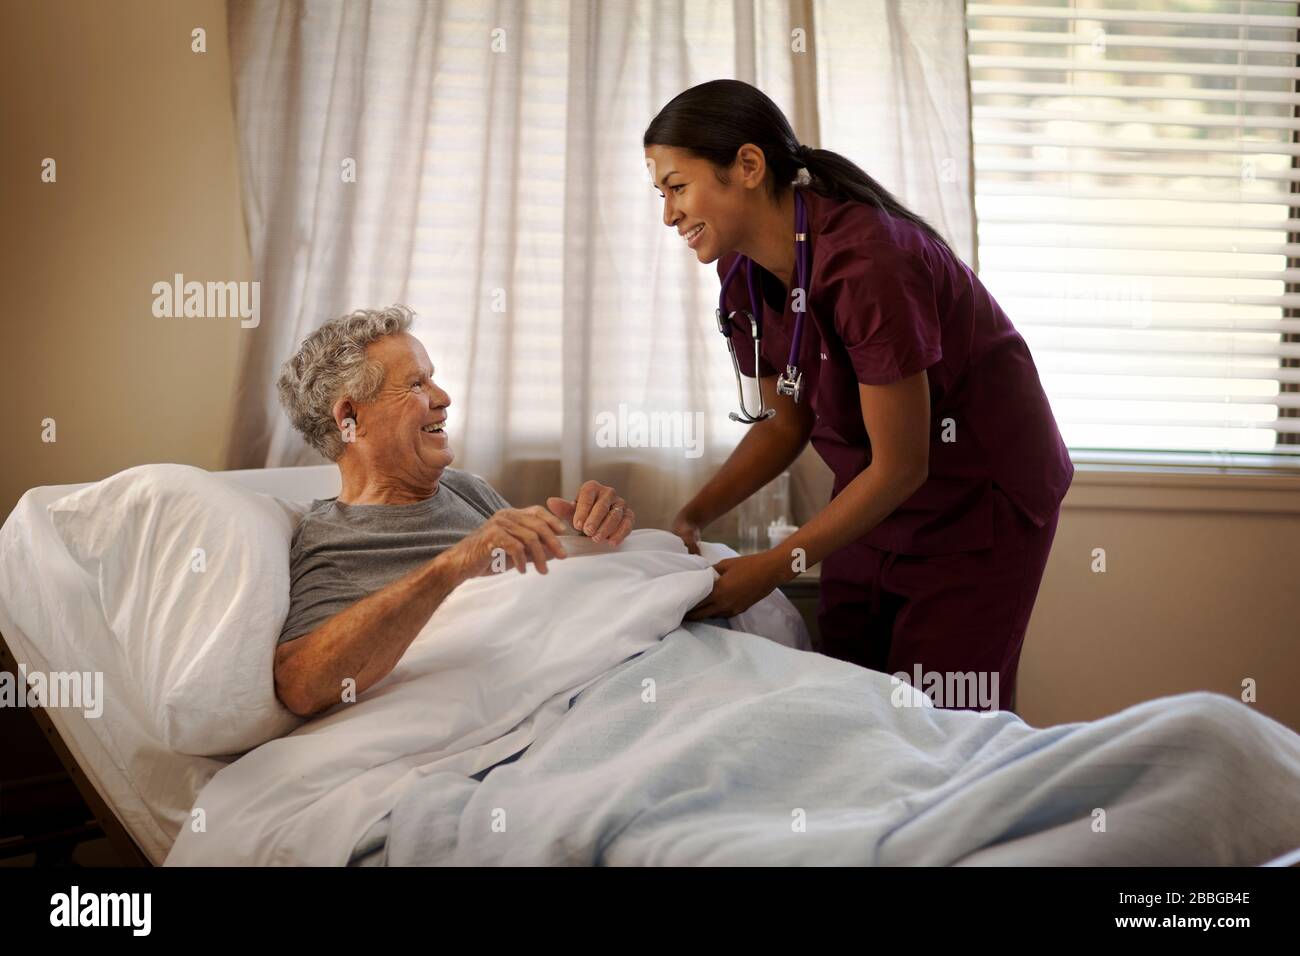 Smiling young nurse tucking in a senior man in a hospital bed Stock Photo